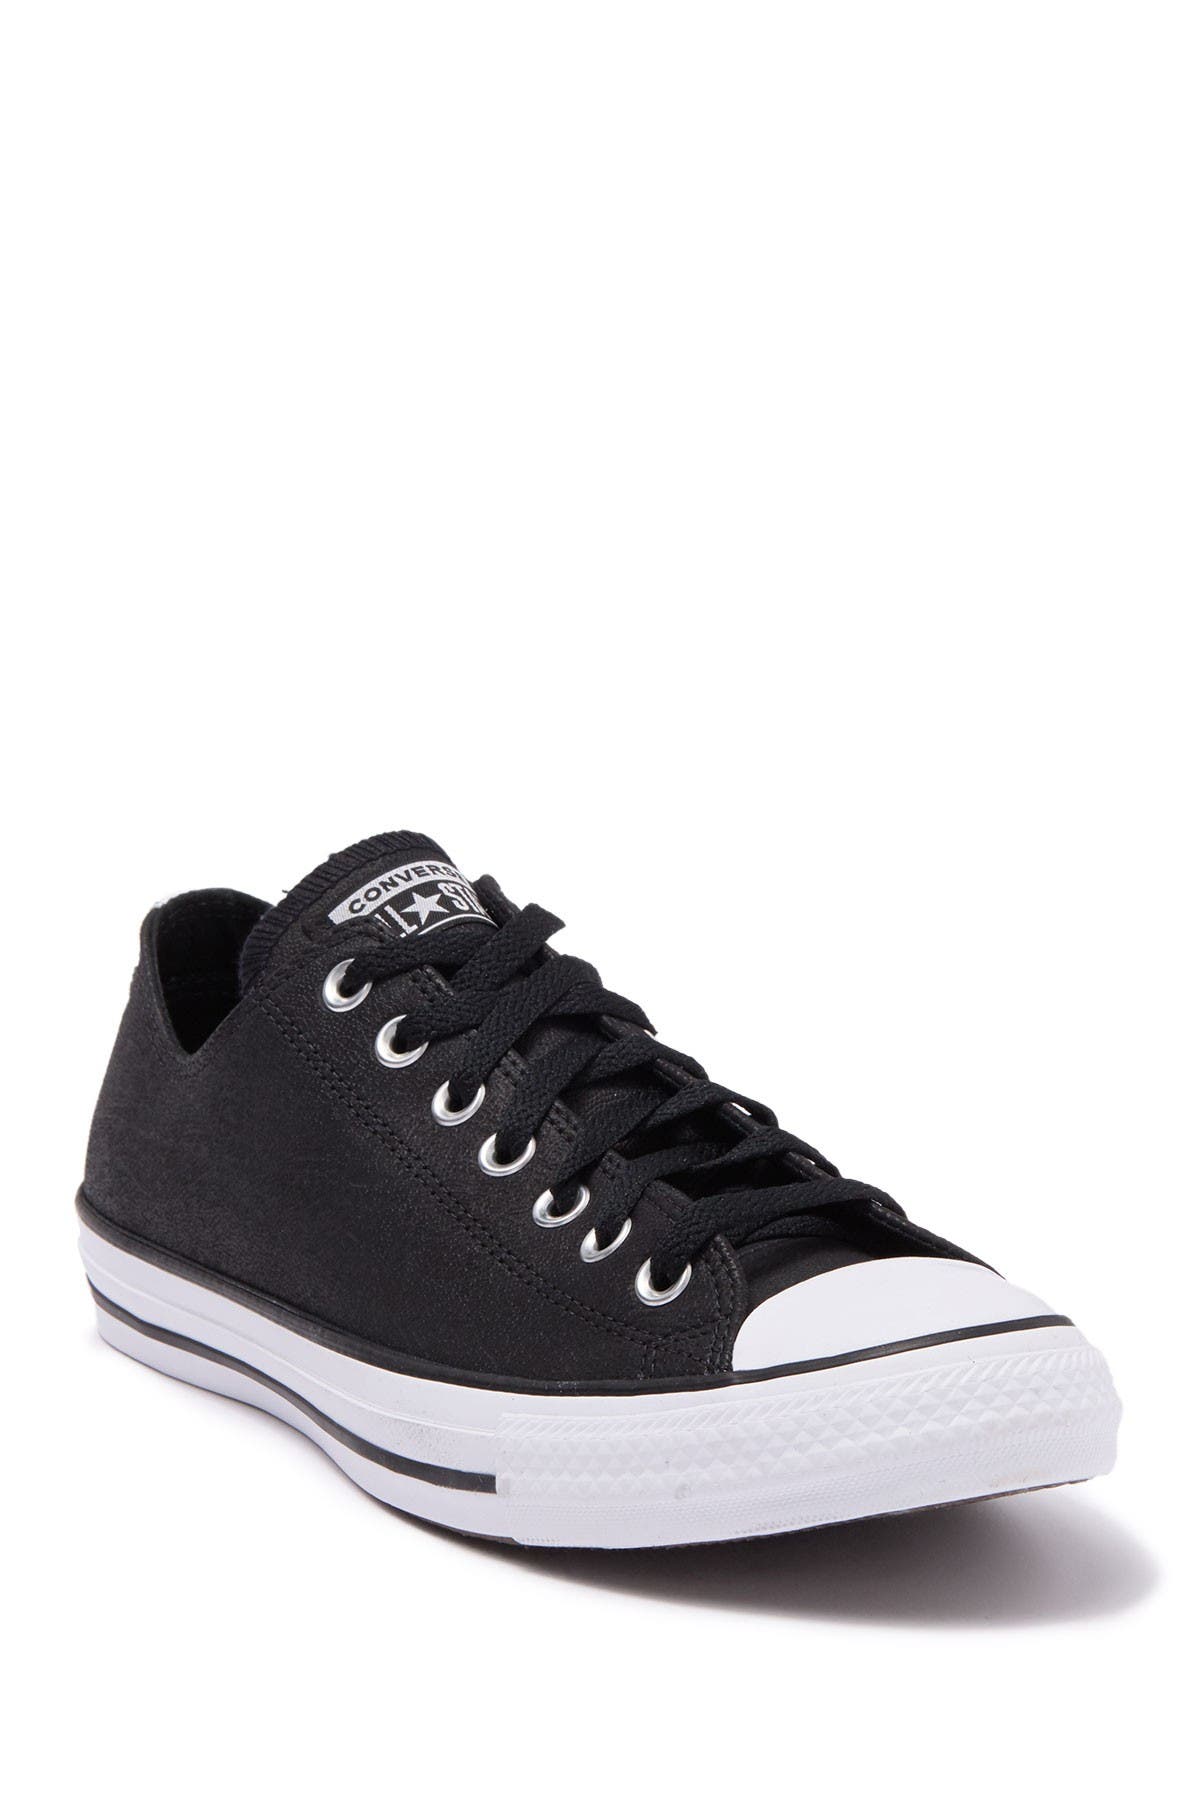 converse leather nordstrom